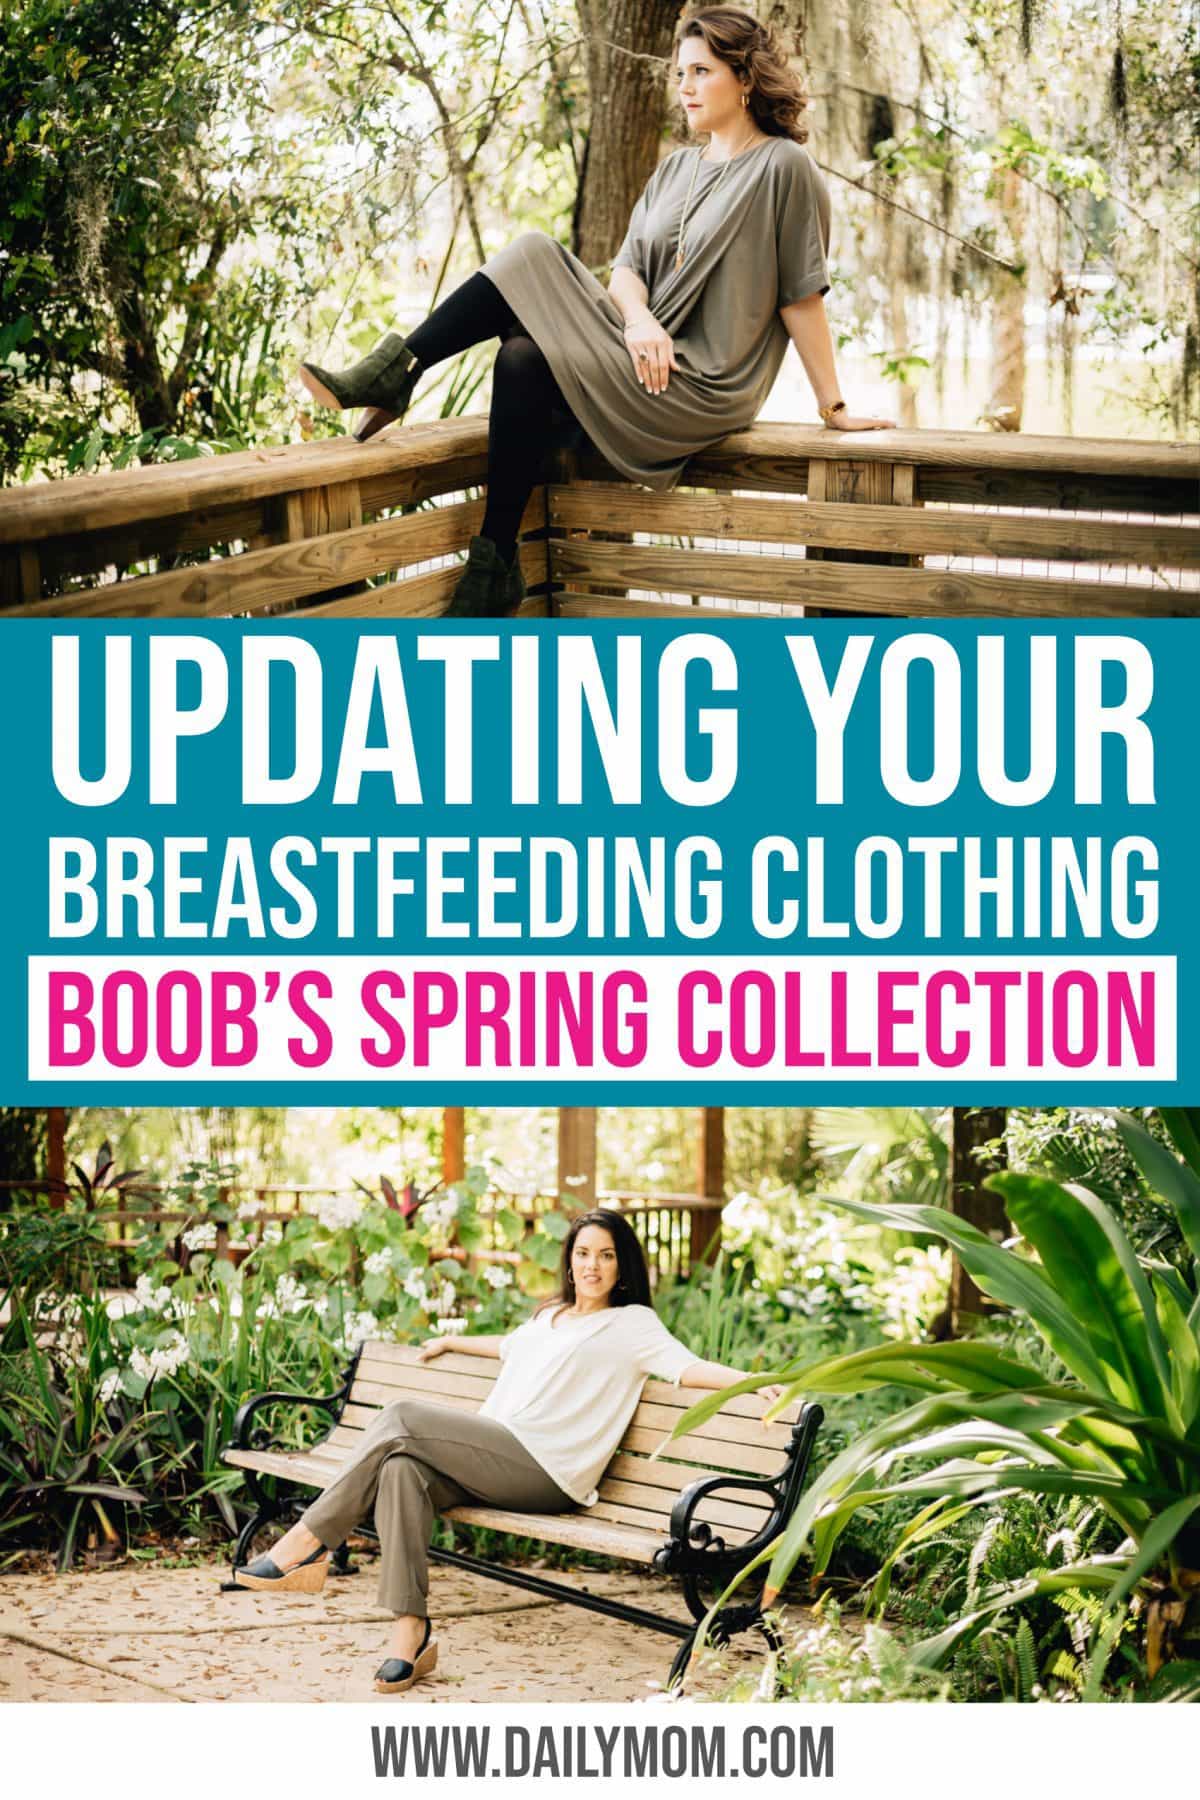 Updating Your Breastfeeding Clothing With Boob's Spring Collection